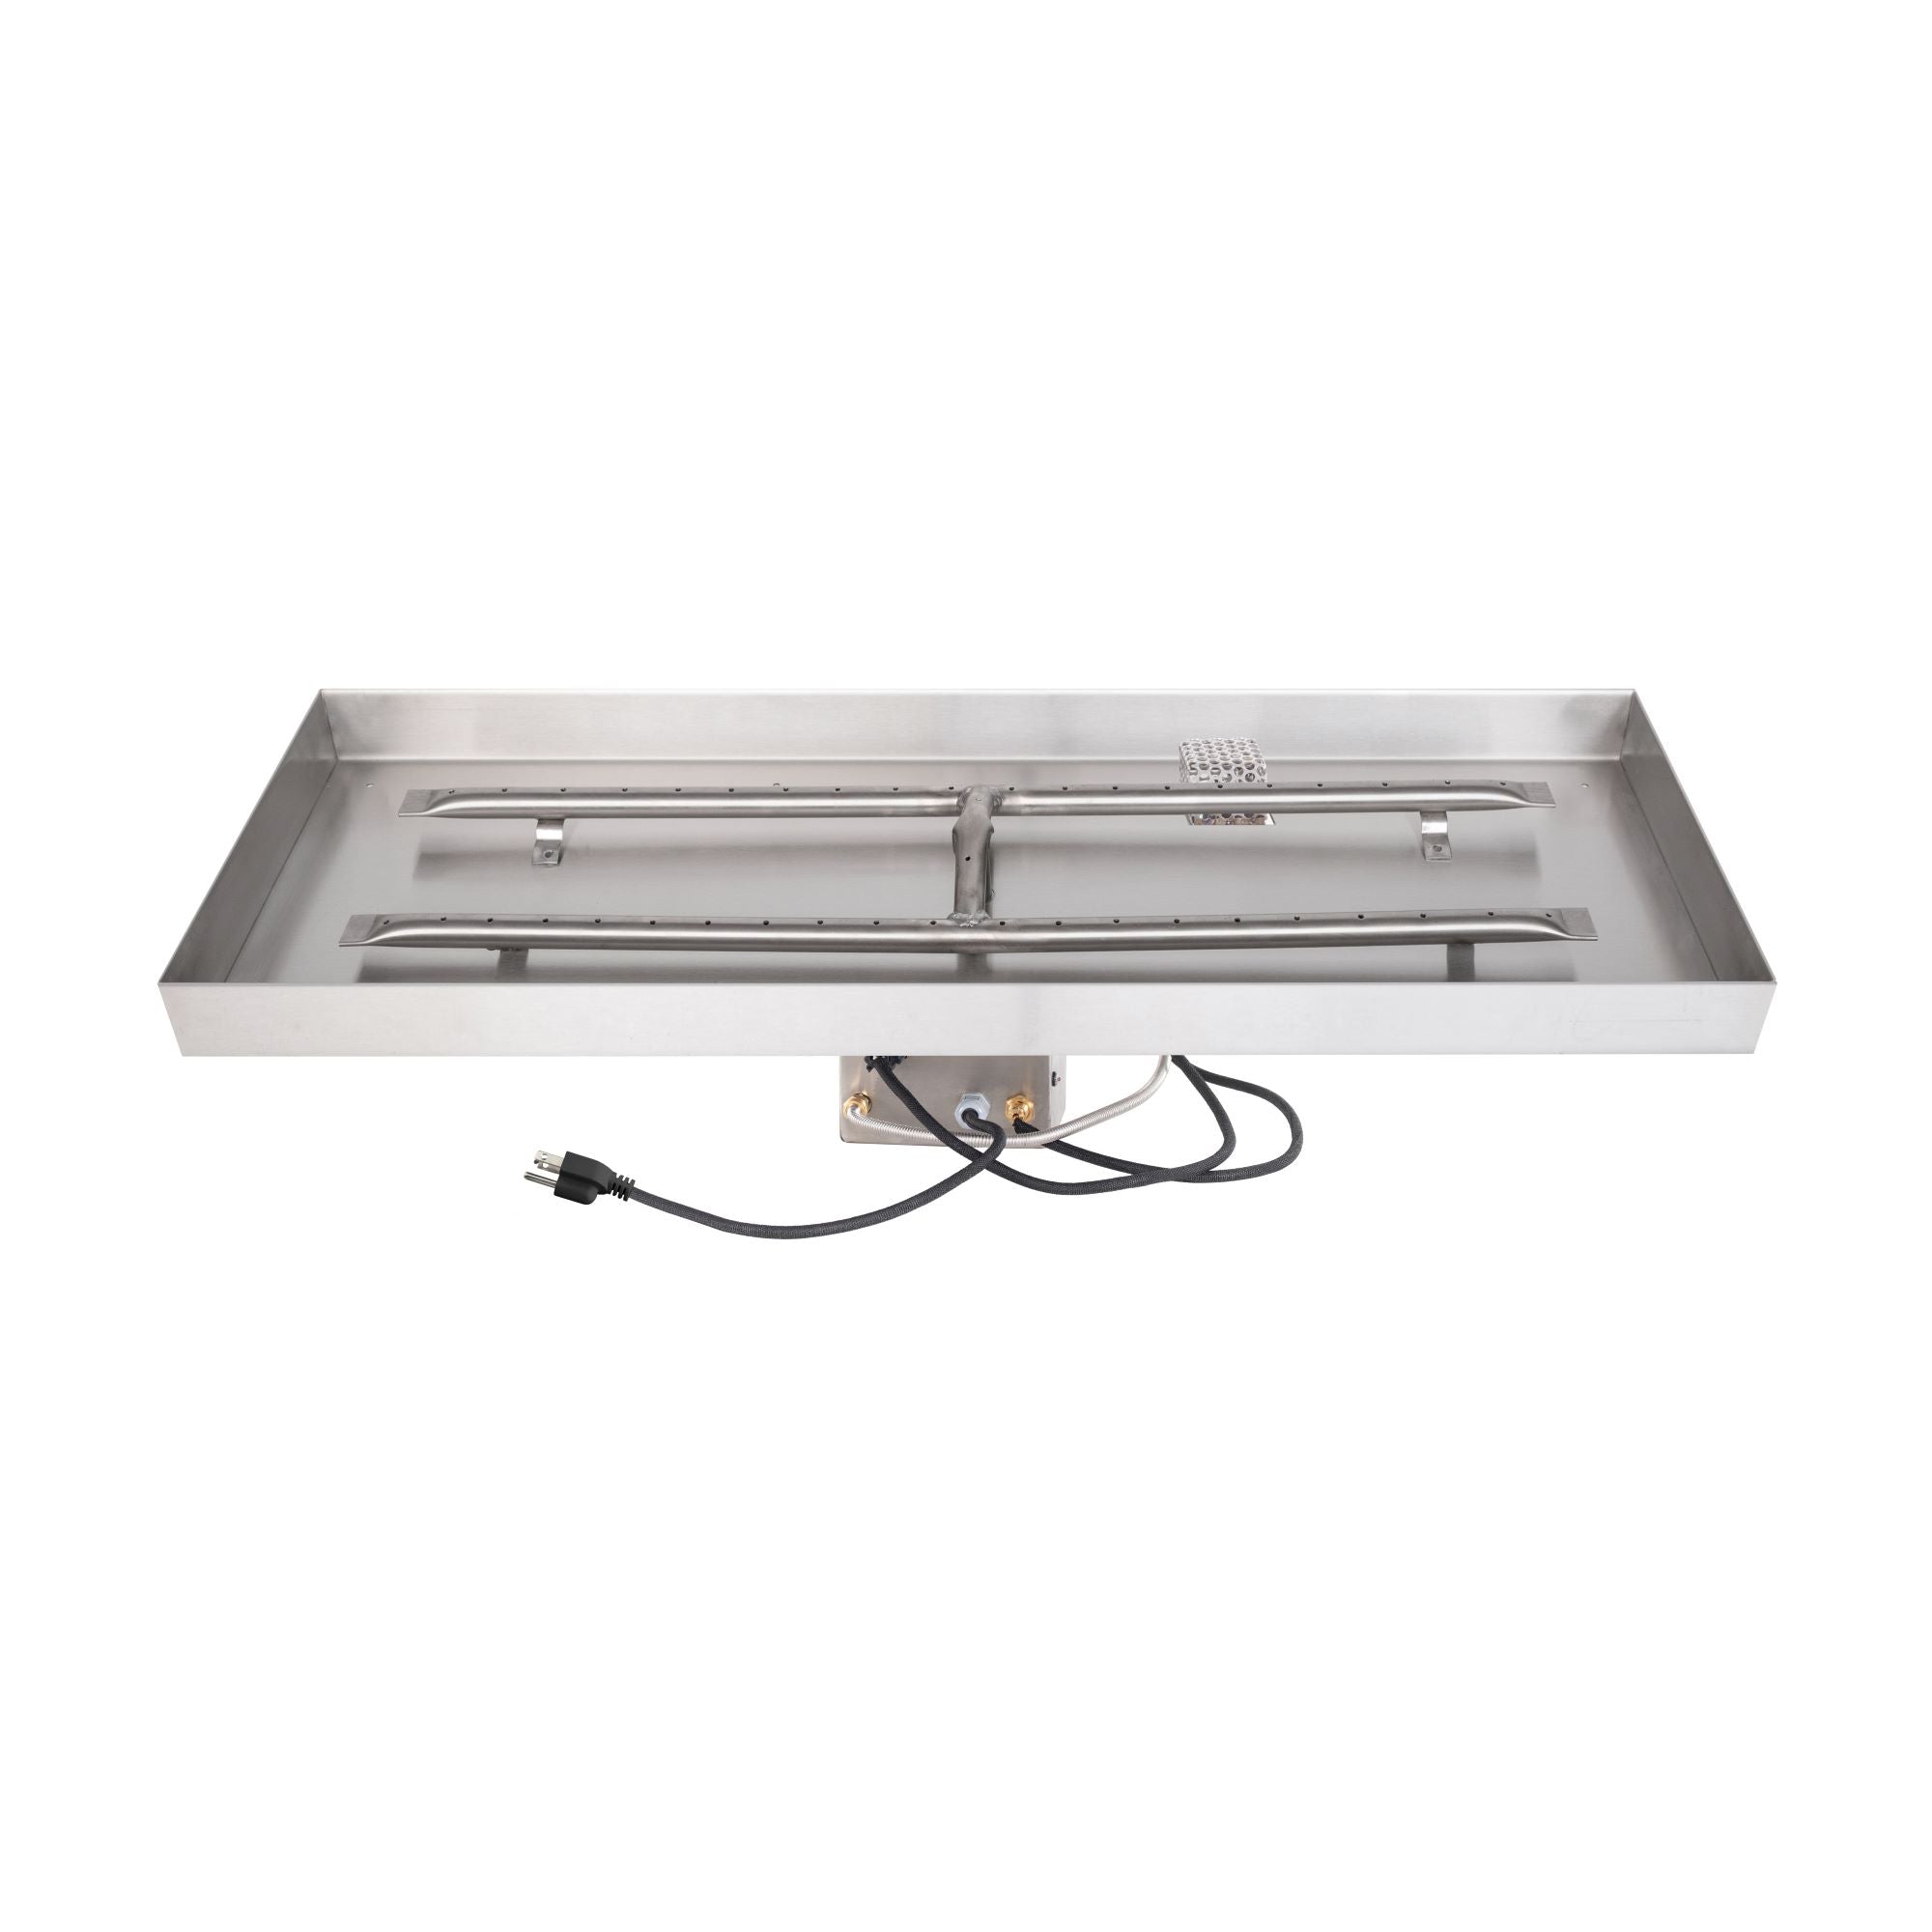 The Outdoor Plus Rectangular Lipless Drop-in Pan with Stainless Steel H Burner